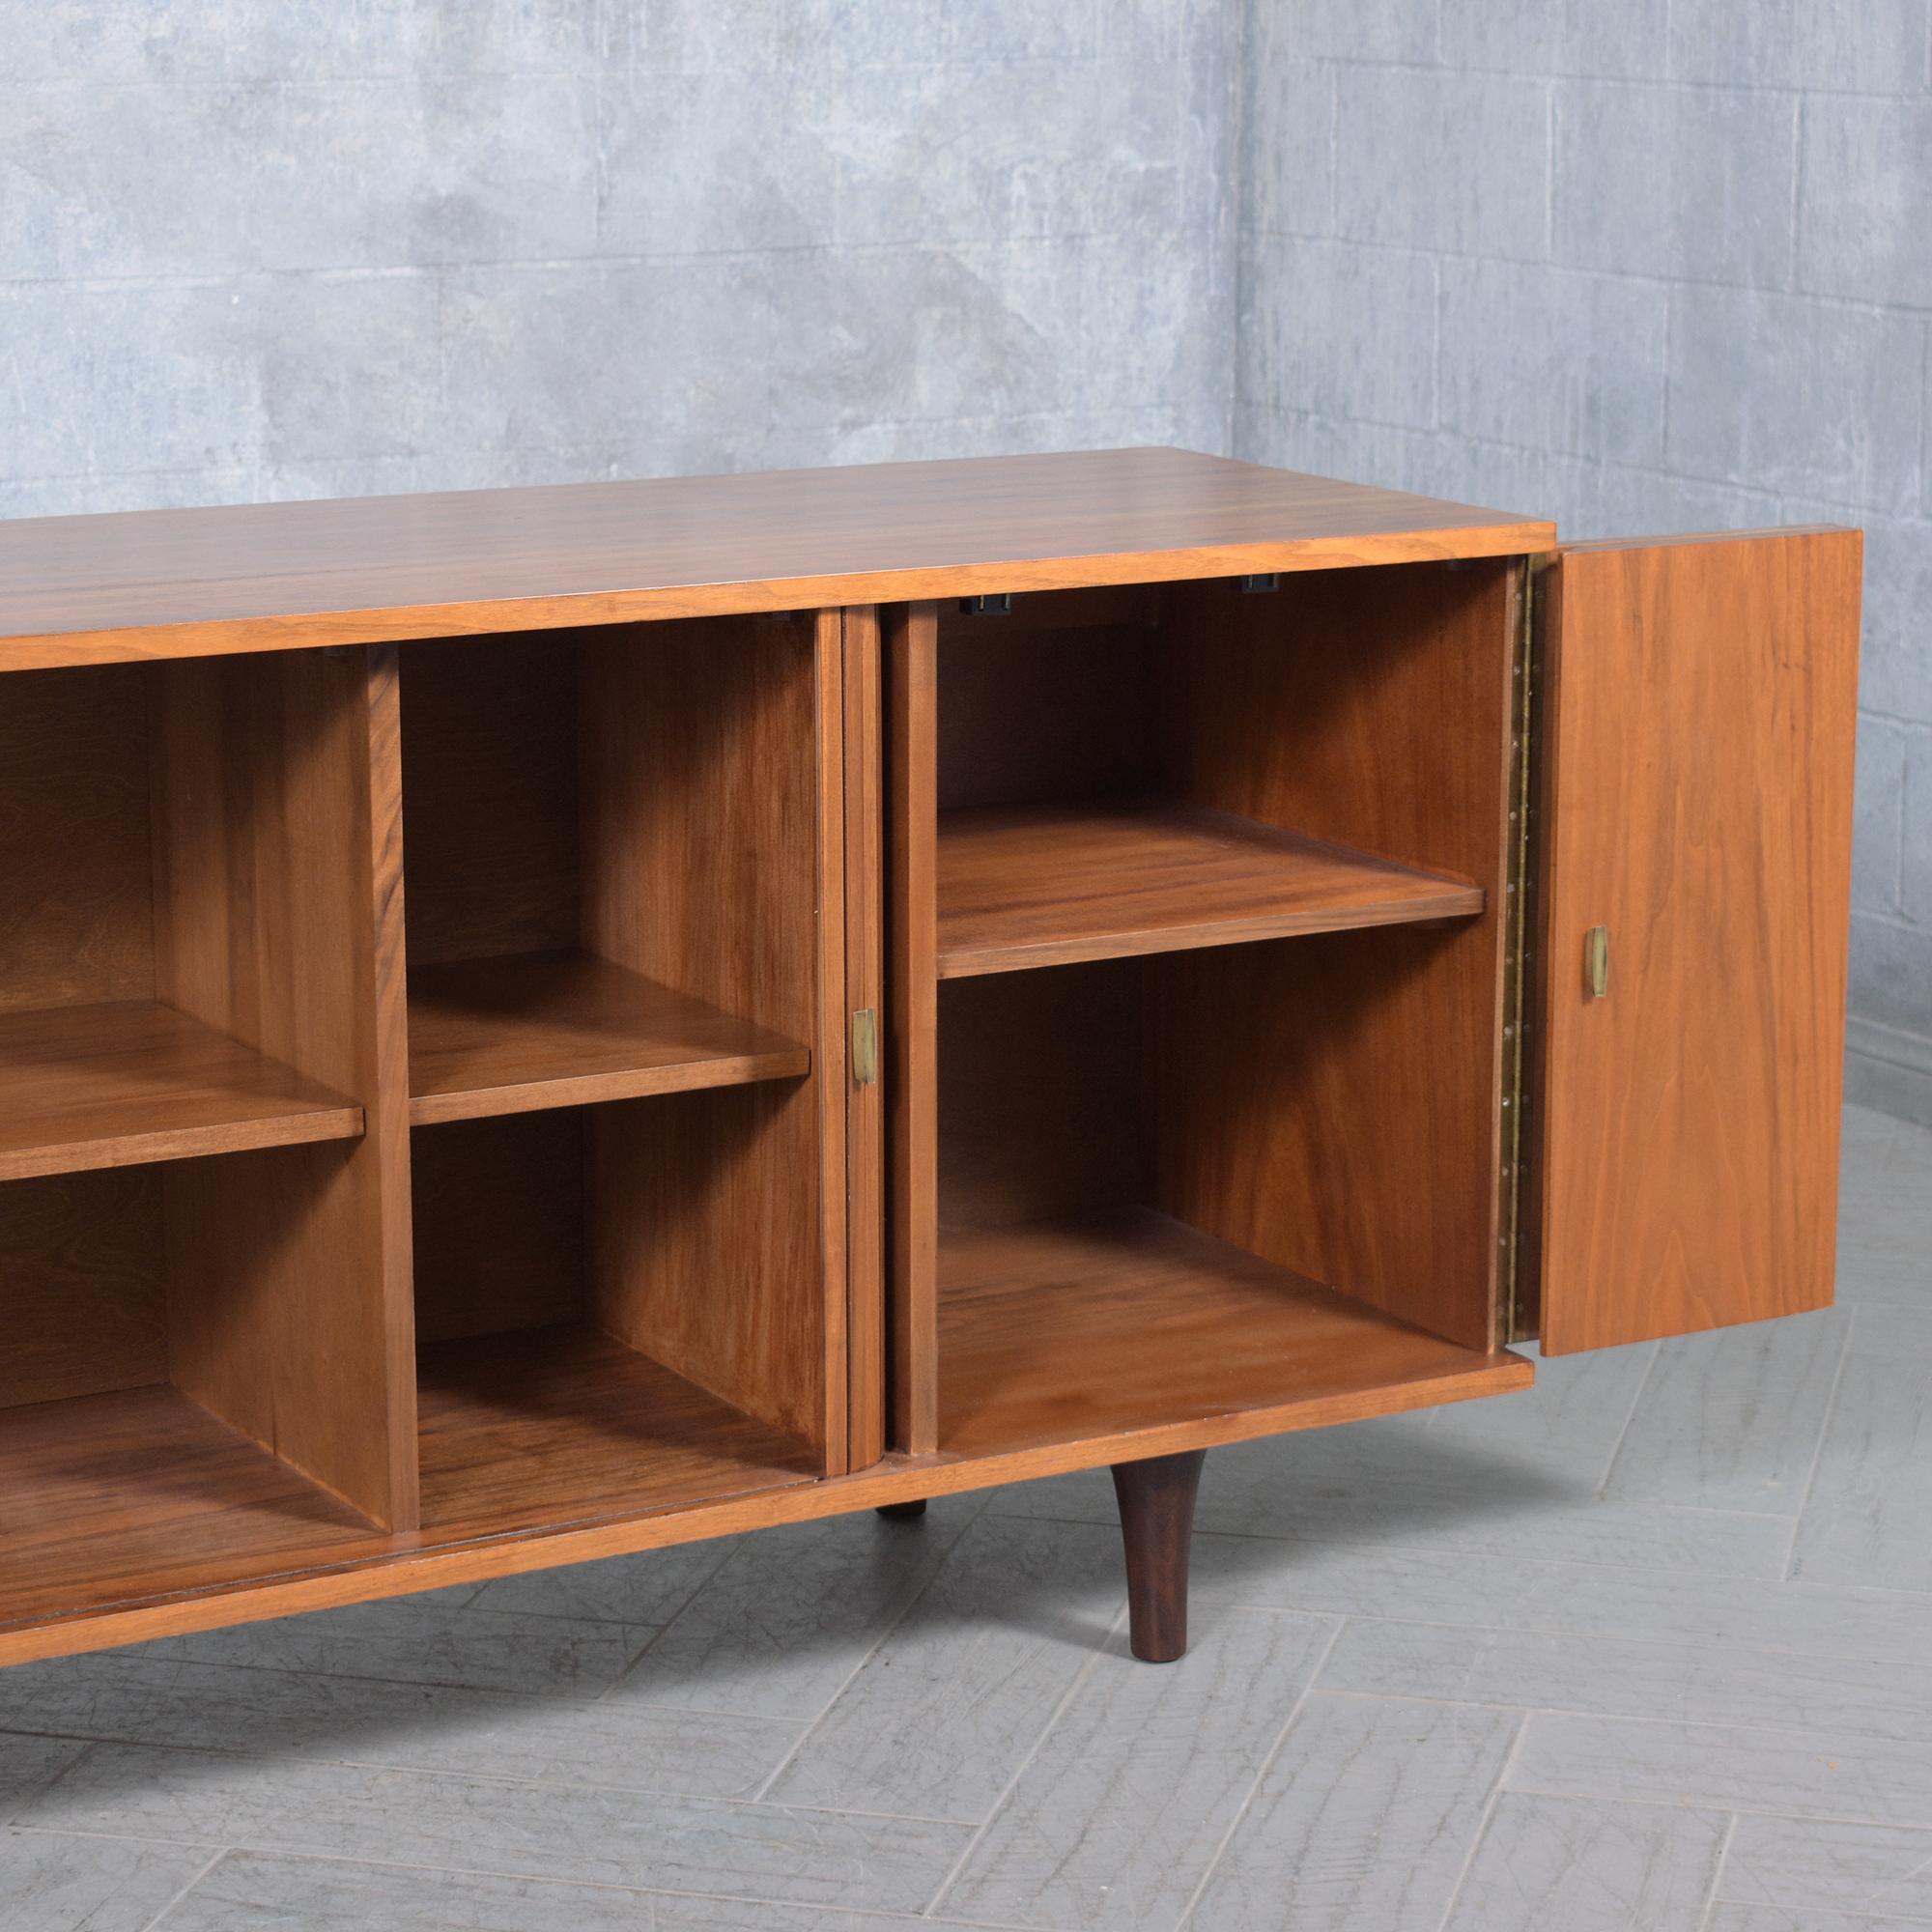 1960s Mid-Century Modern Walnut Credenza with Tambour Doors and Storage For Sale 3